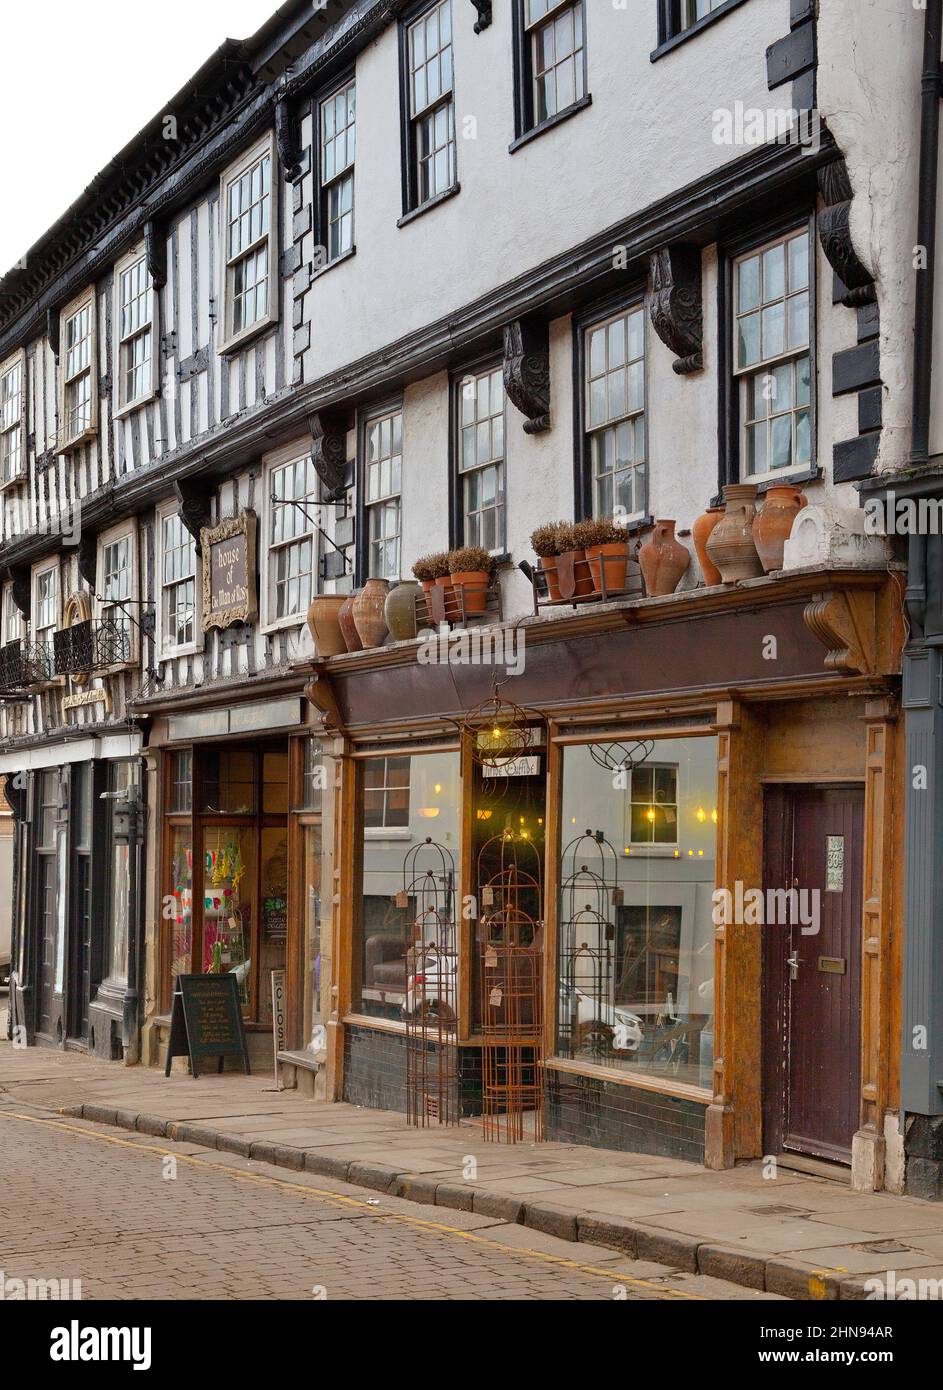 Man of Ross House shops, Ross on wye, Herefordshire Stock Photo